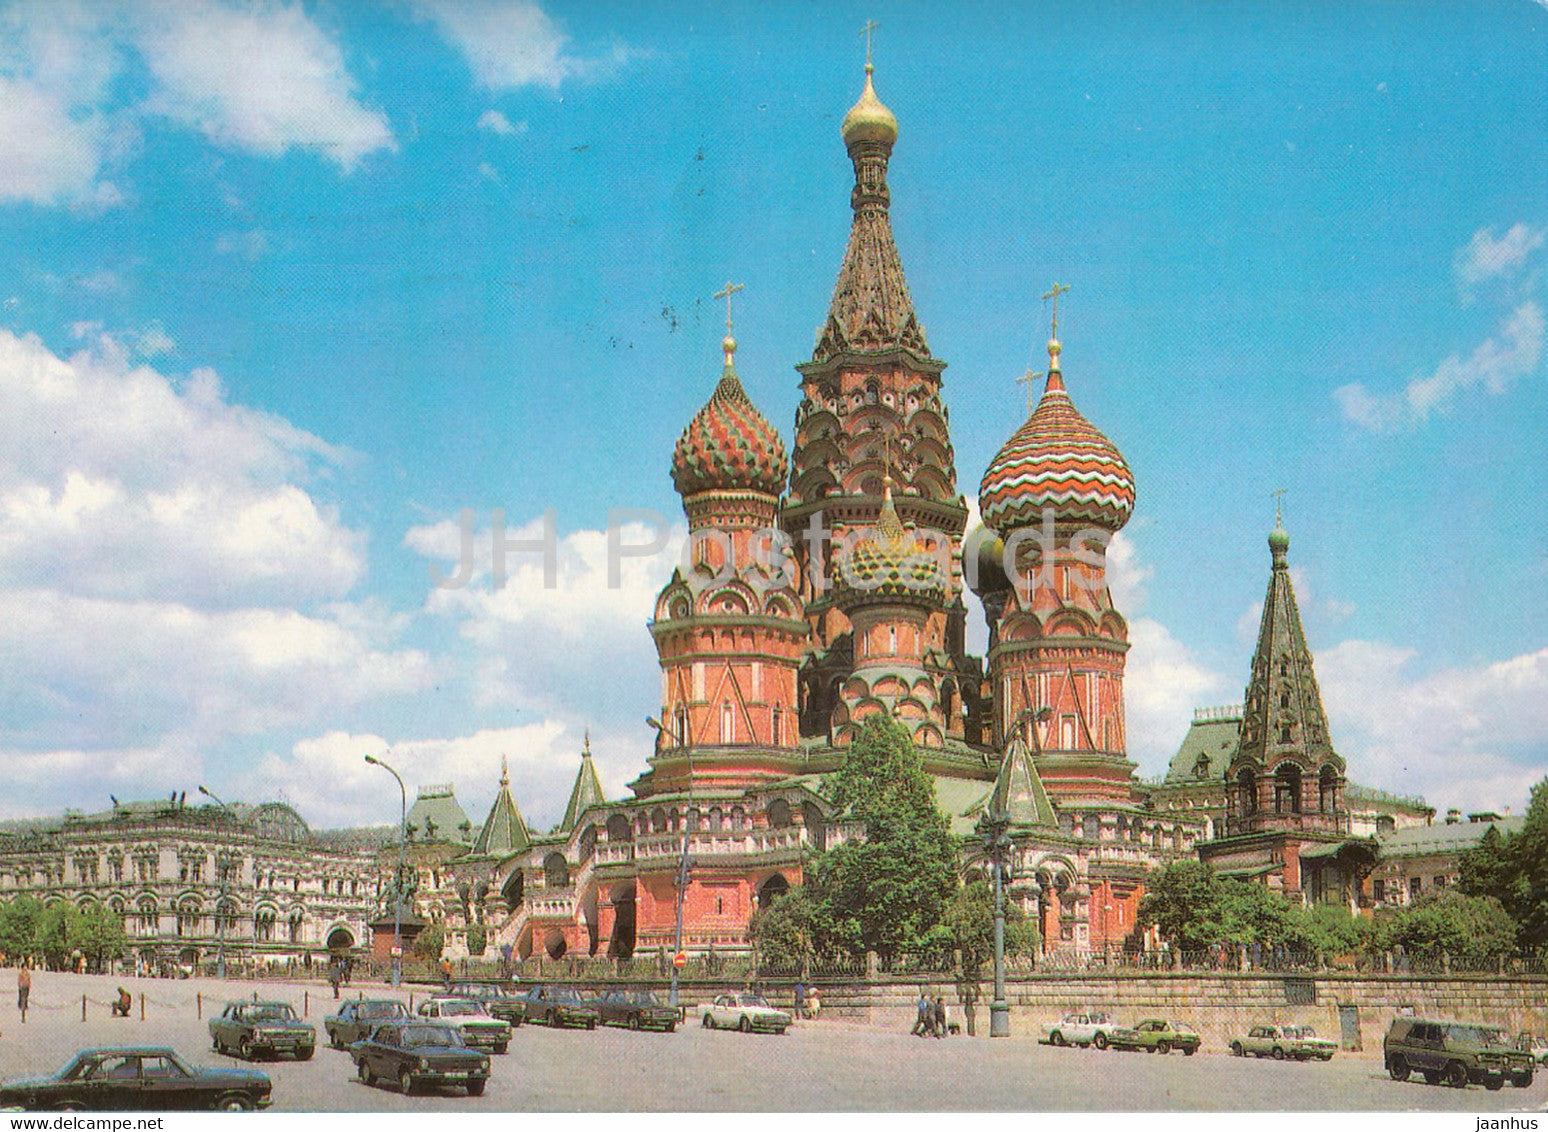 Moscow - Pokrovsky Cathedral - St. Basil's Cathedral - car Volga - postal stationery - 1986 - Russia USSR - used - JH Postcards